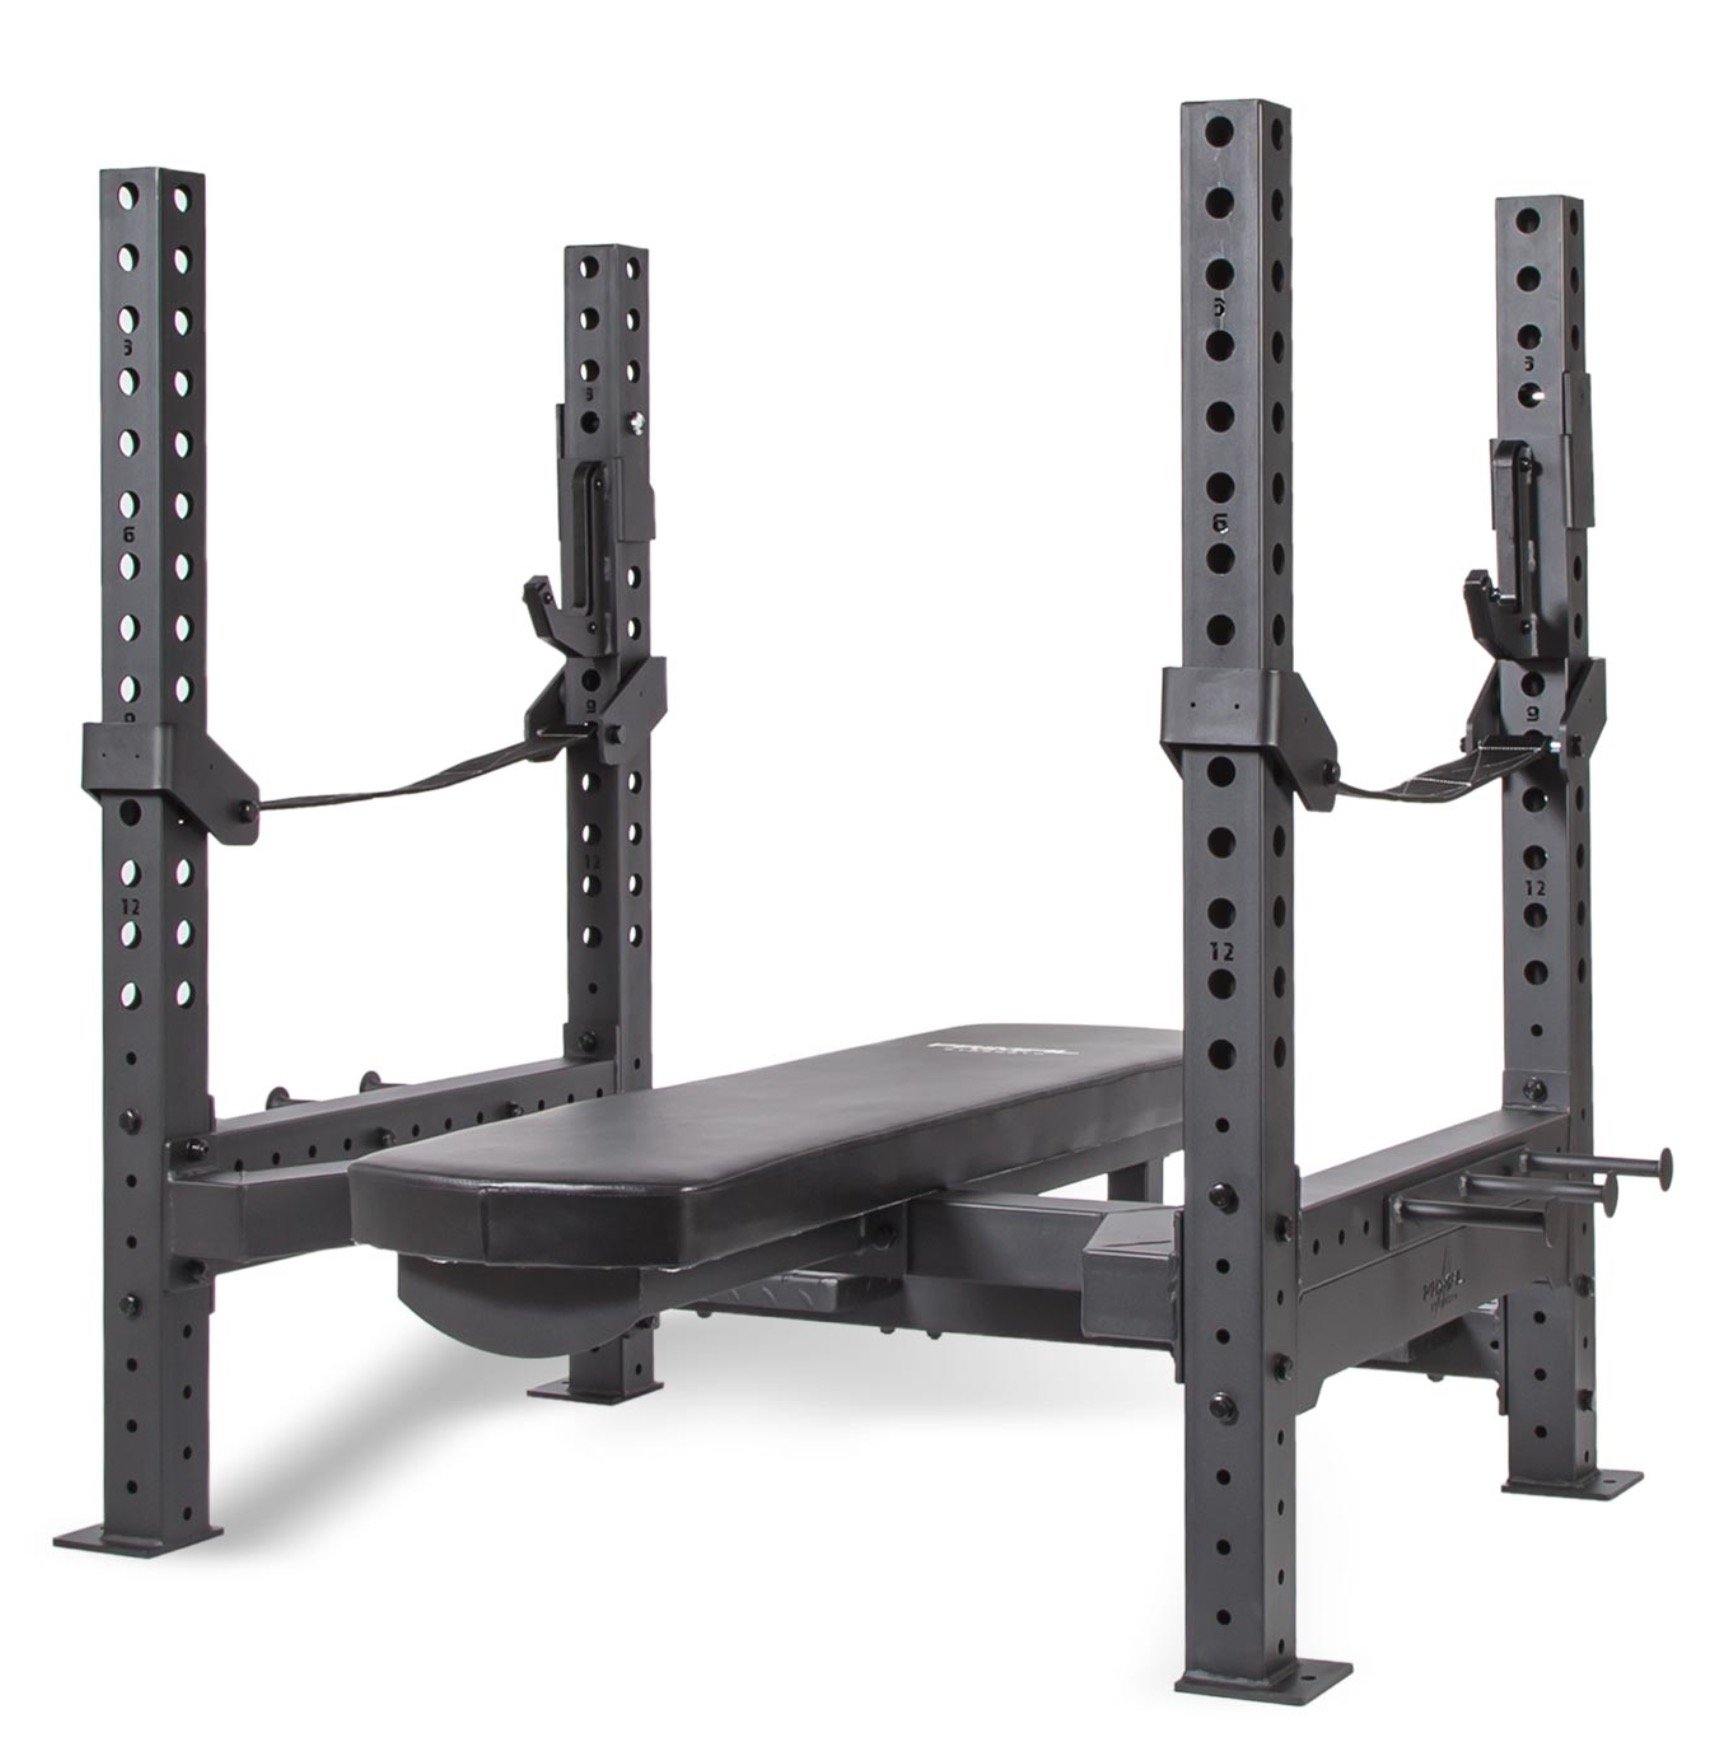 Primal Strength Olympic Safety Bench